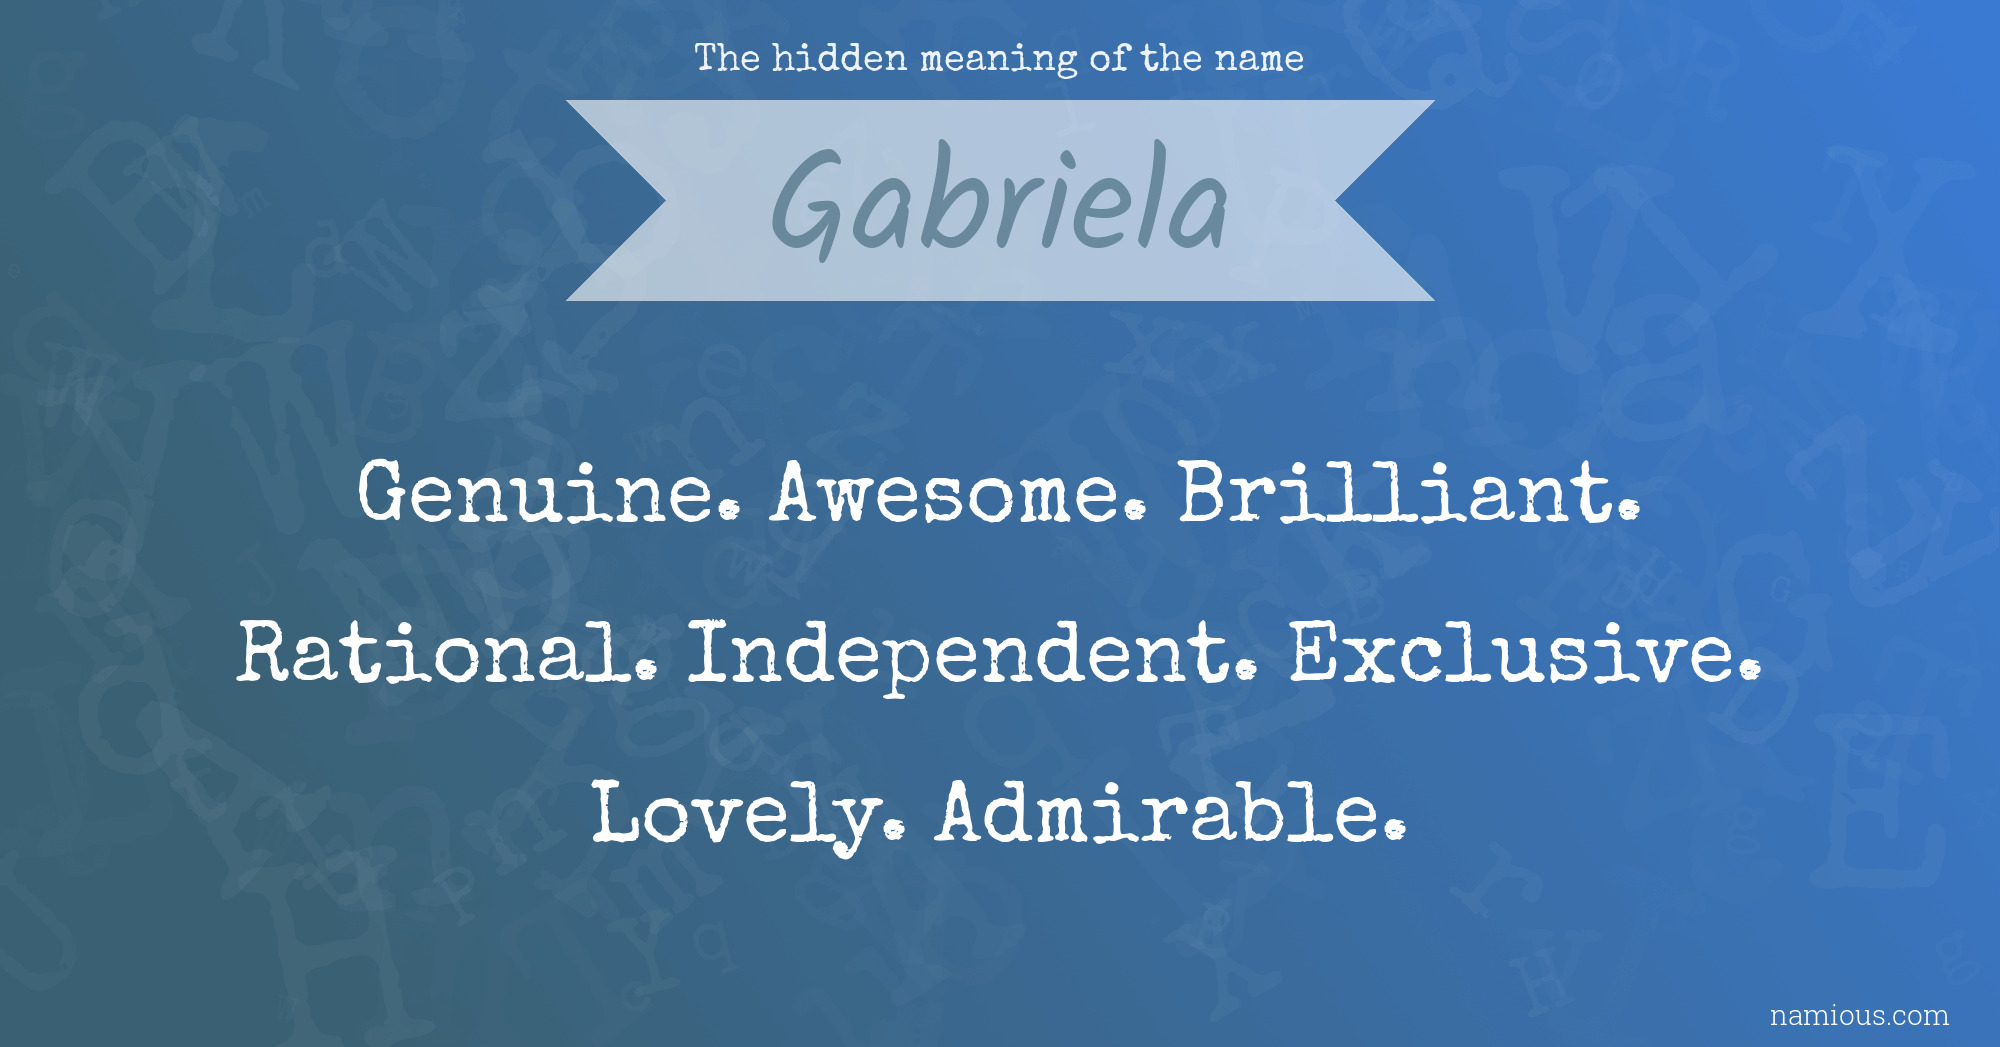 The hidden meaning of the name Gabriela